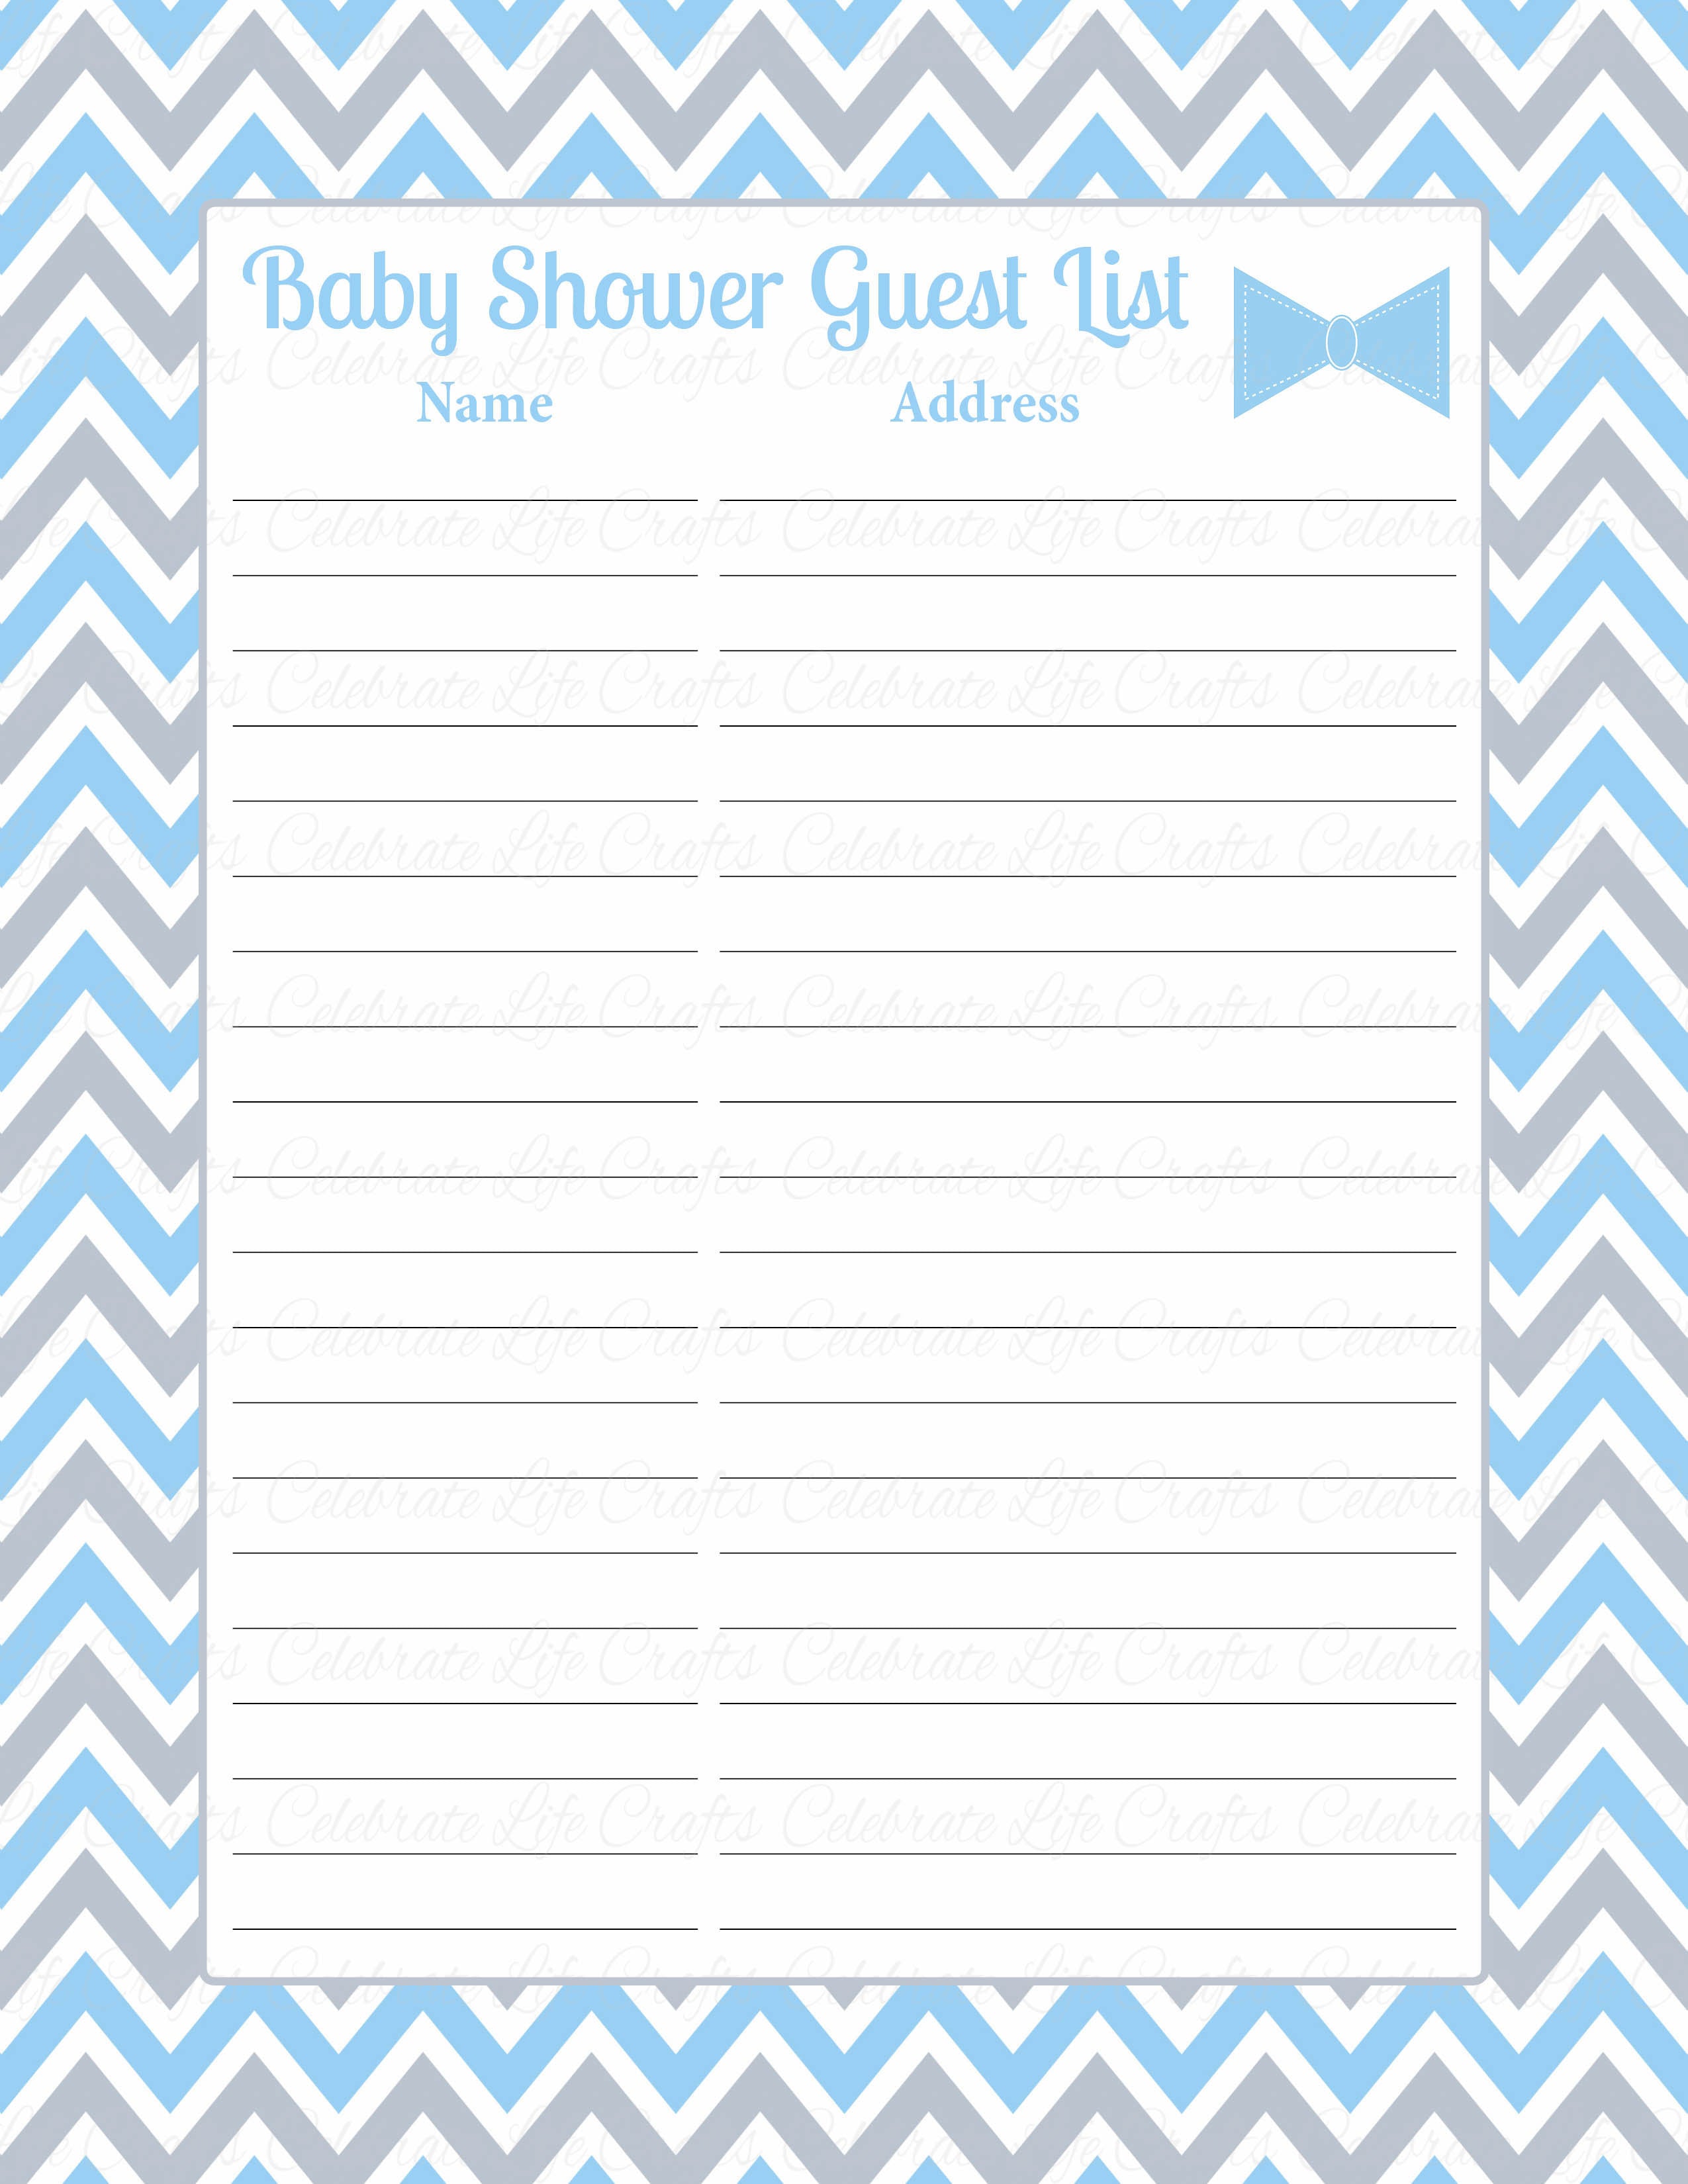 Free Printable Baby Shower Guest List Template